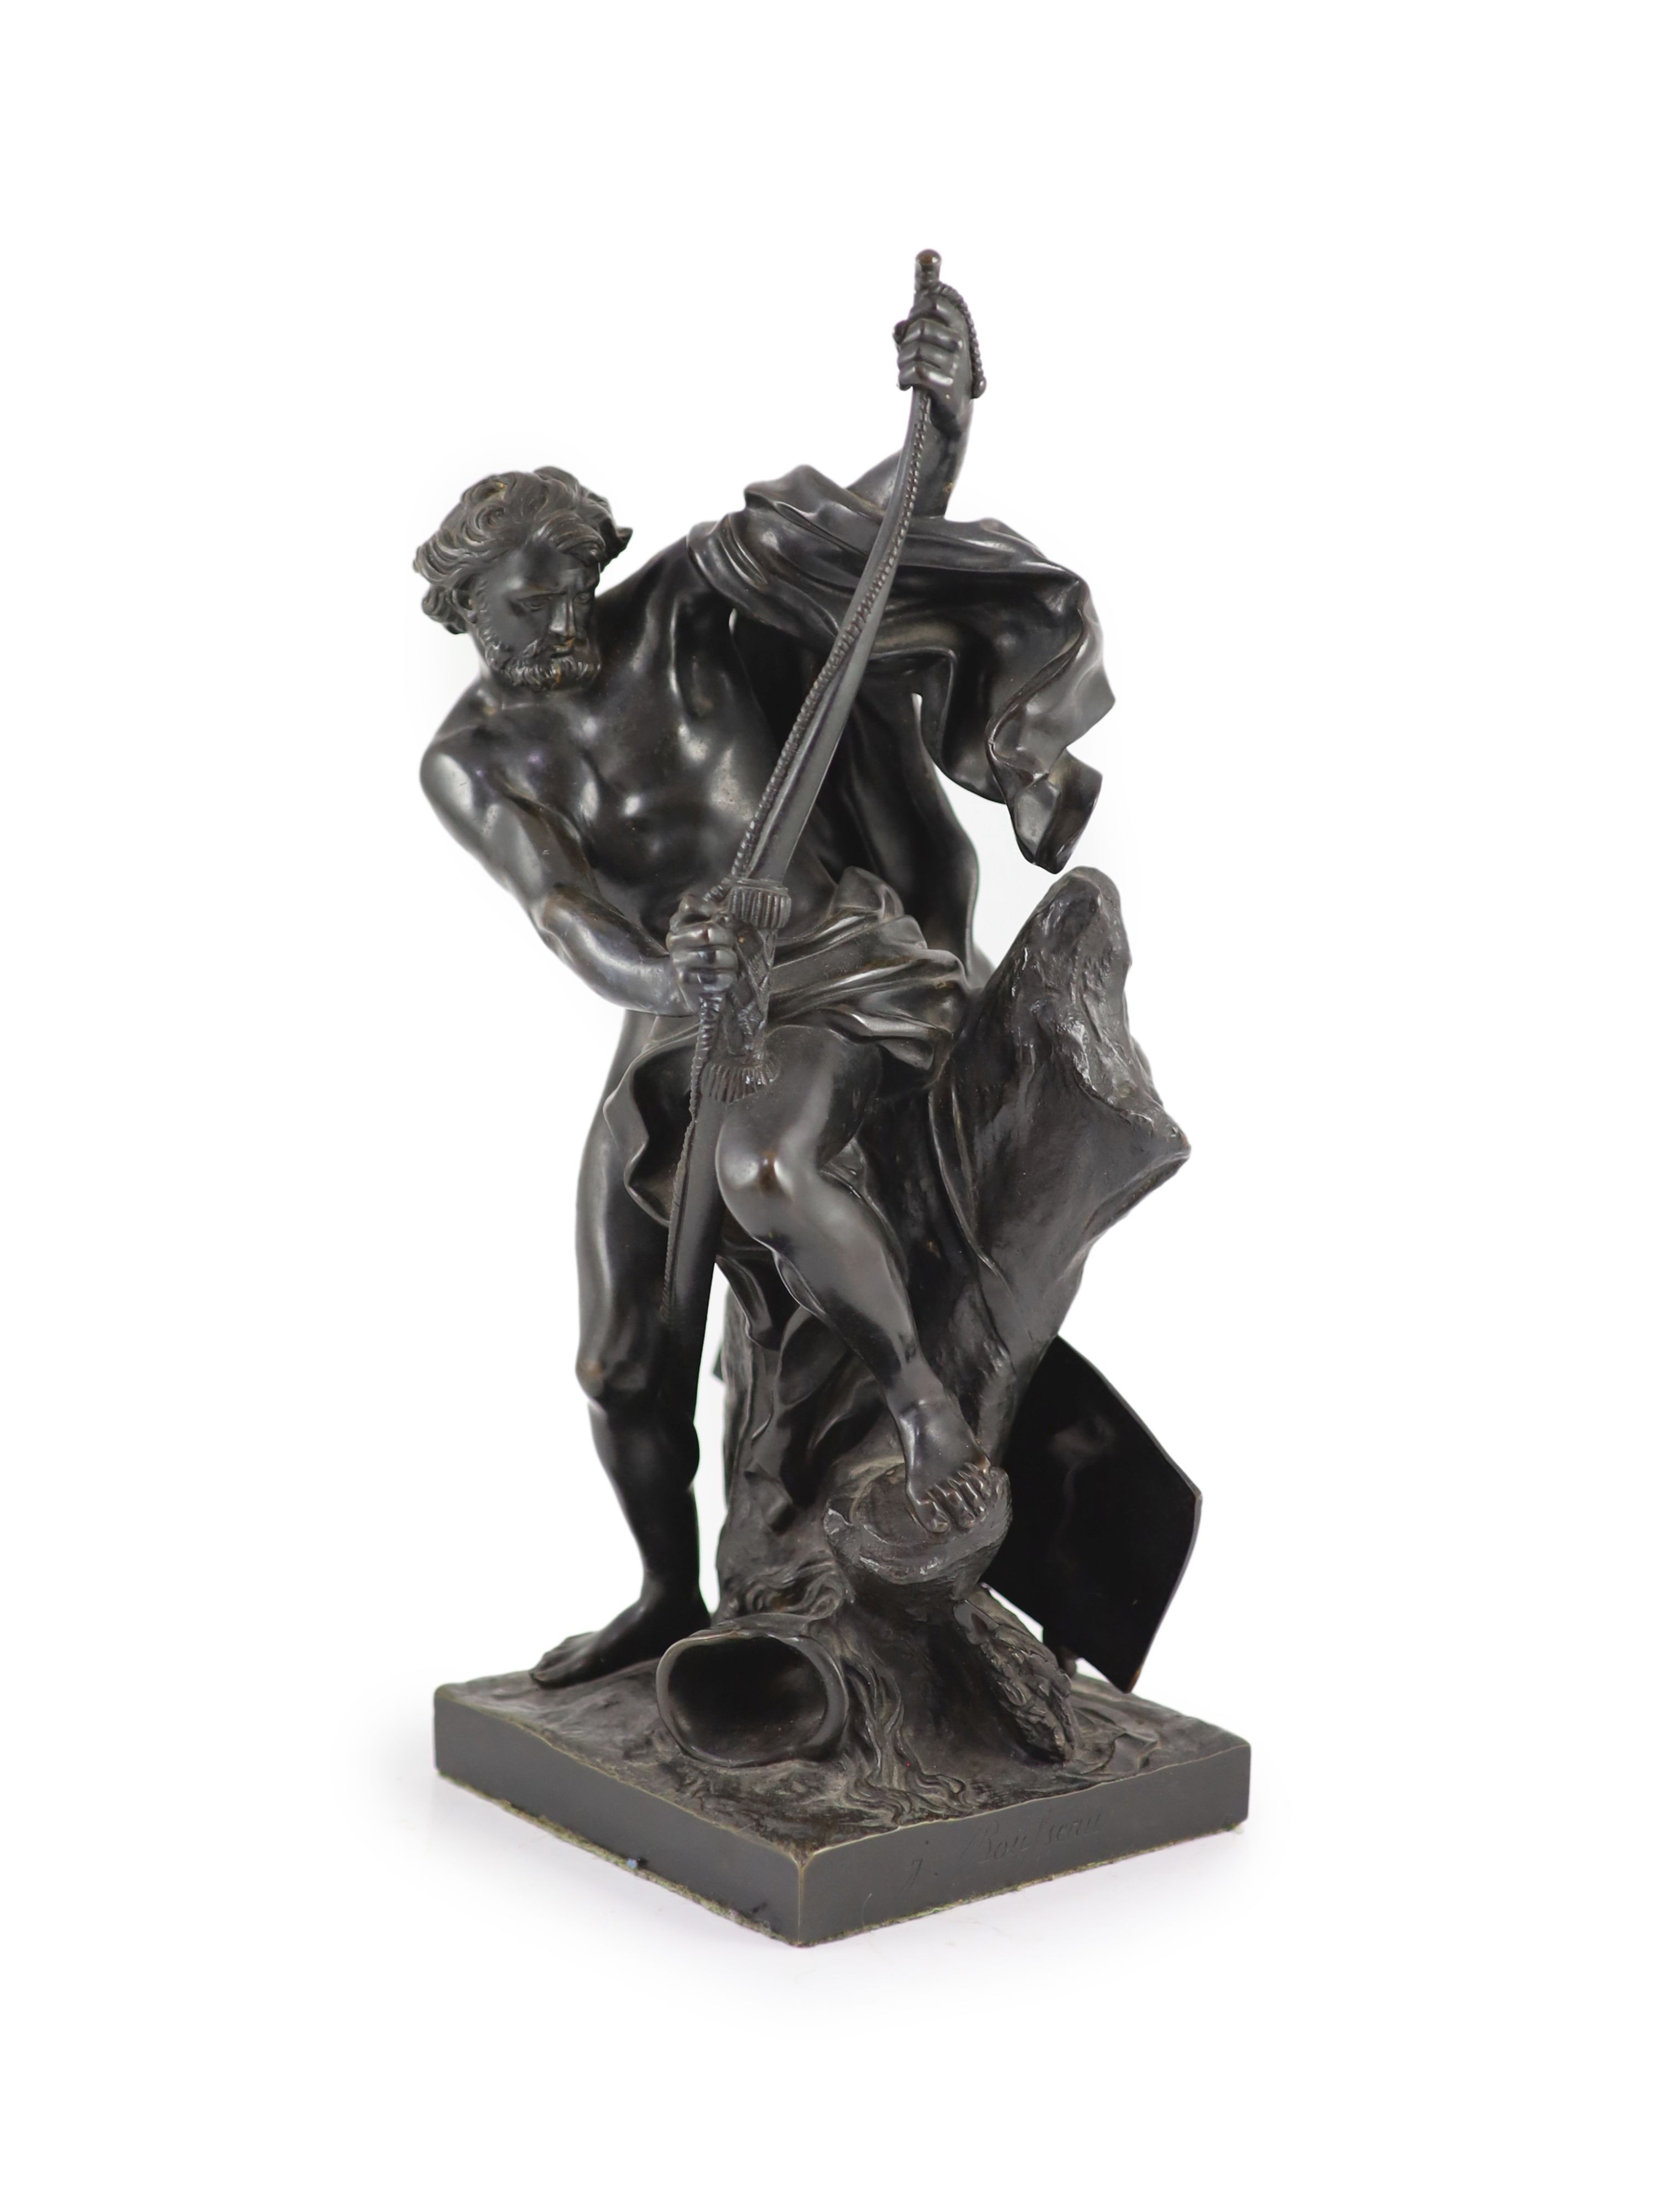 After Jacques Bousseau (French, 1681-1740) 37cm high.